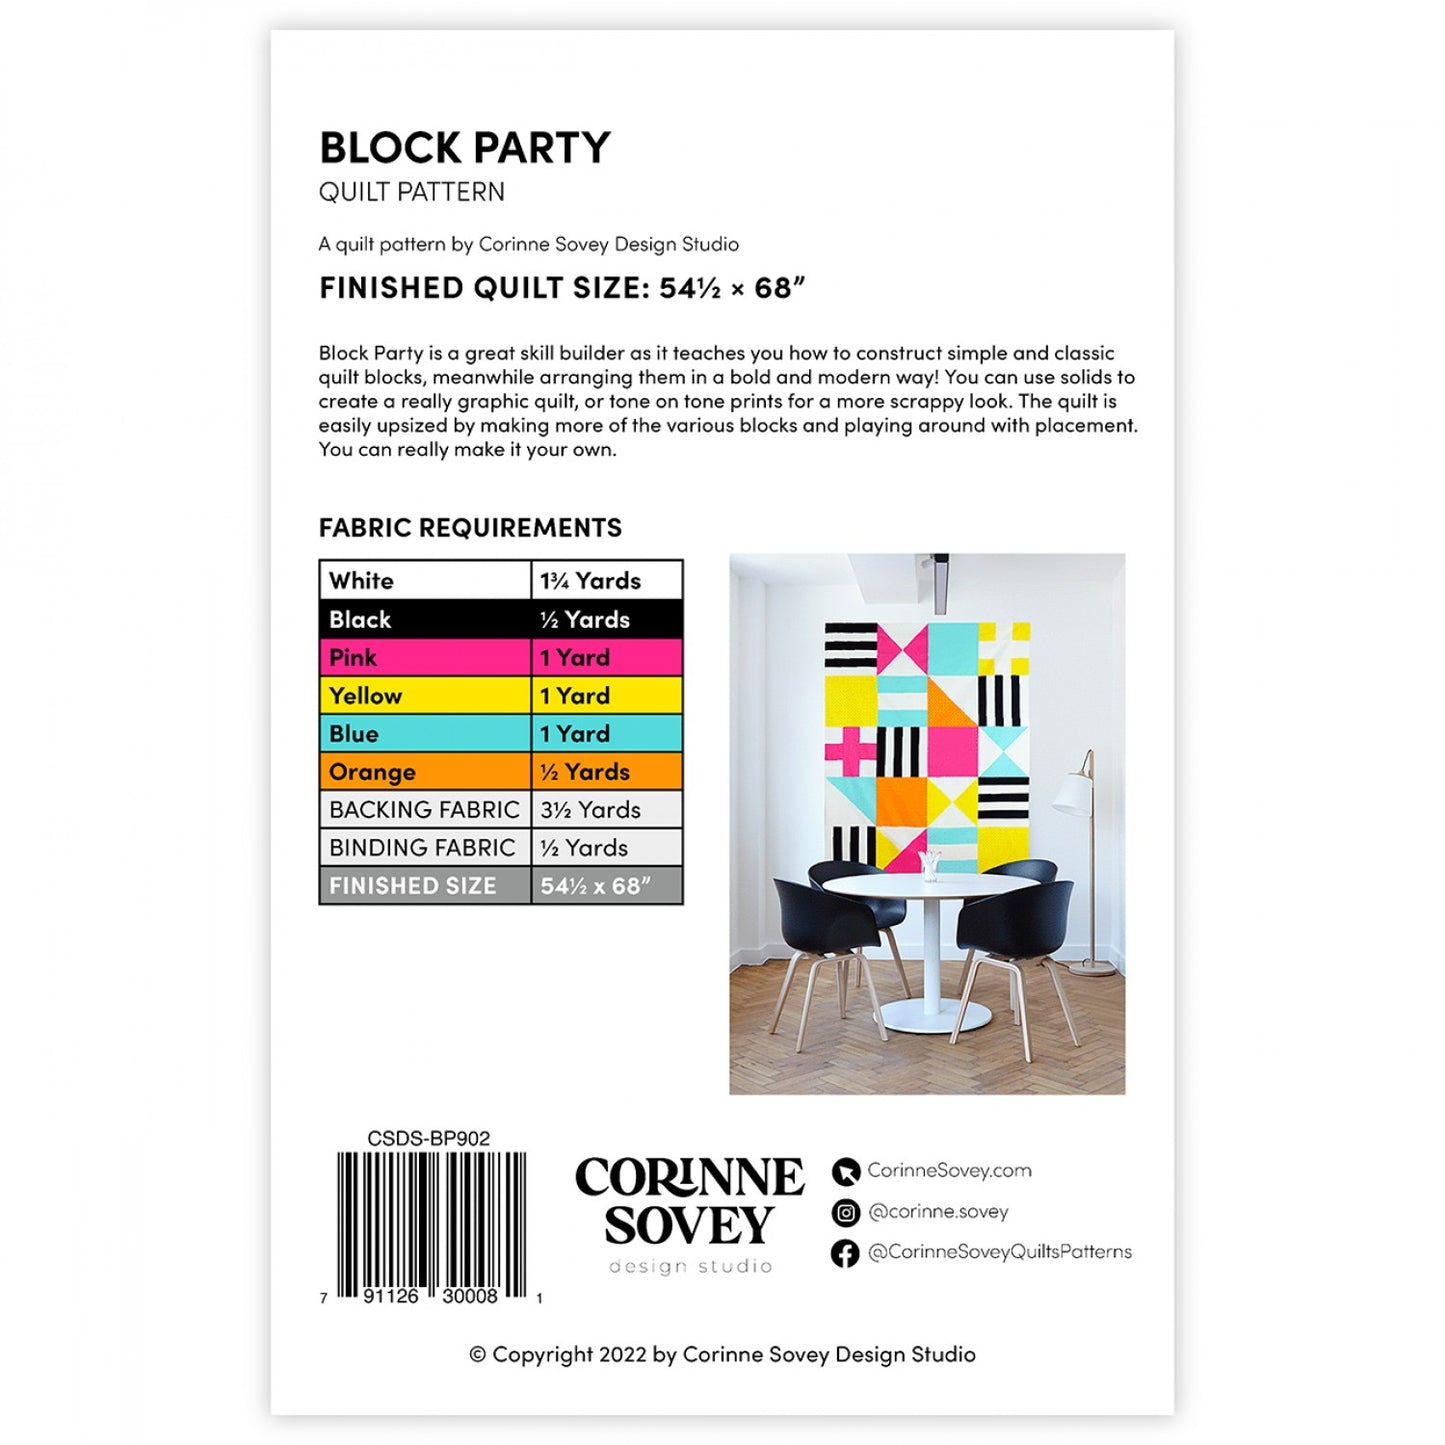 Block Party Quilt Pattern by Corinne Sovey